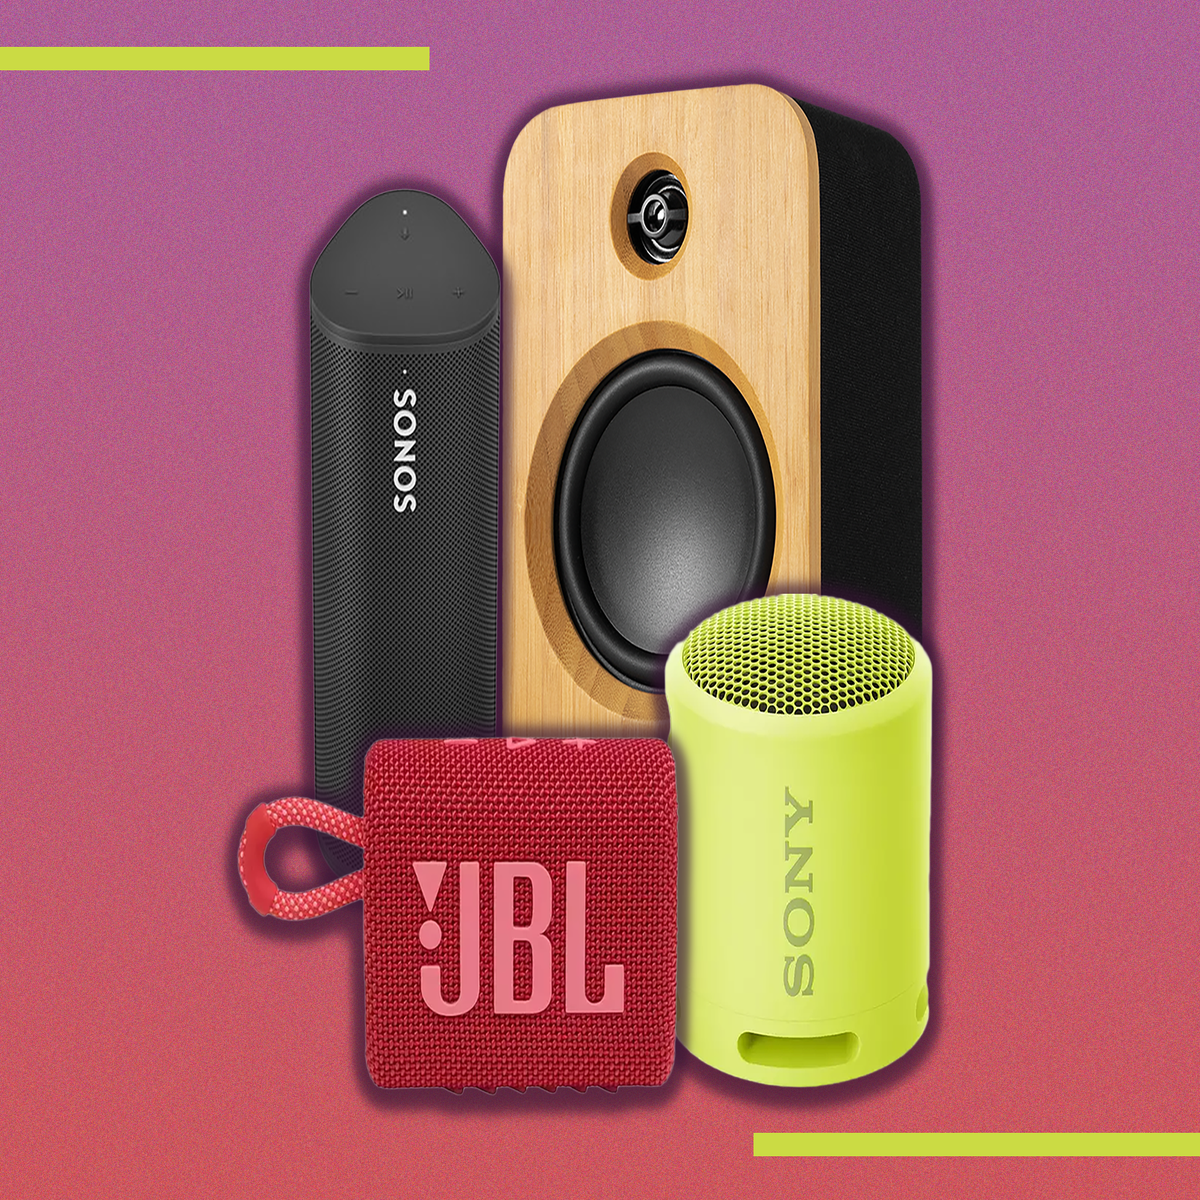 Black Friday: JBL's biggest Bluetooth speakers are 40% off